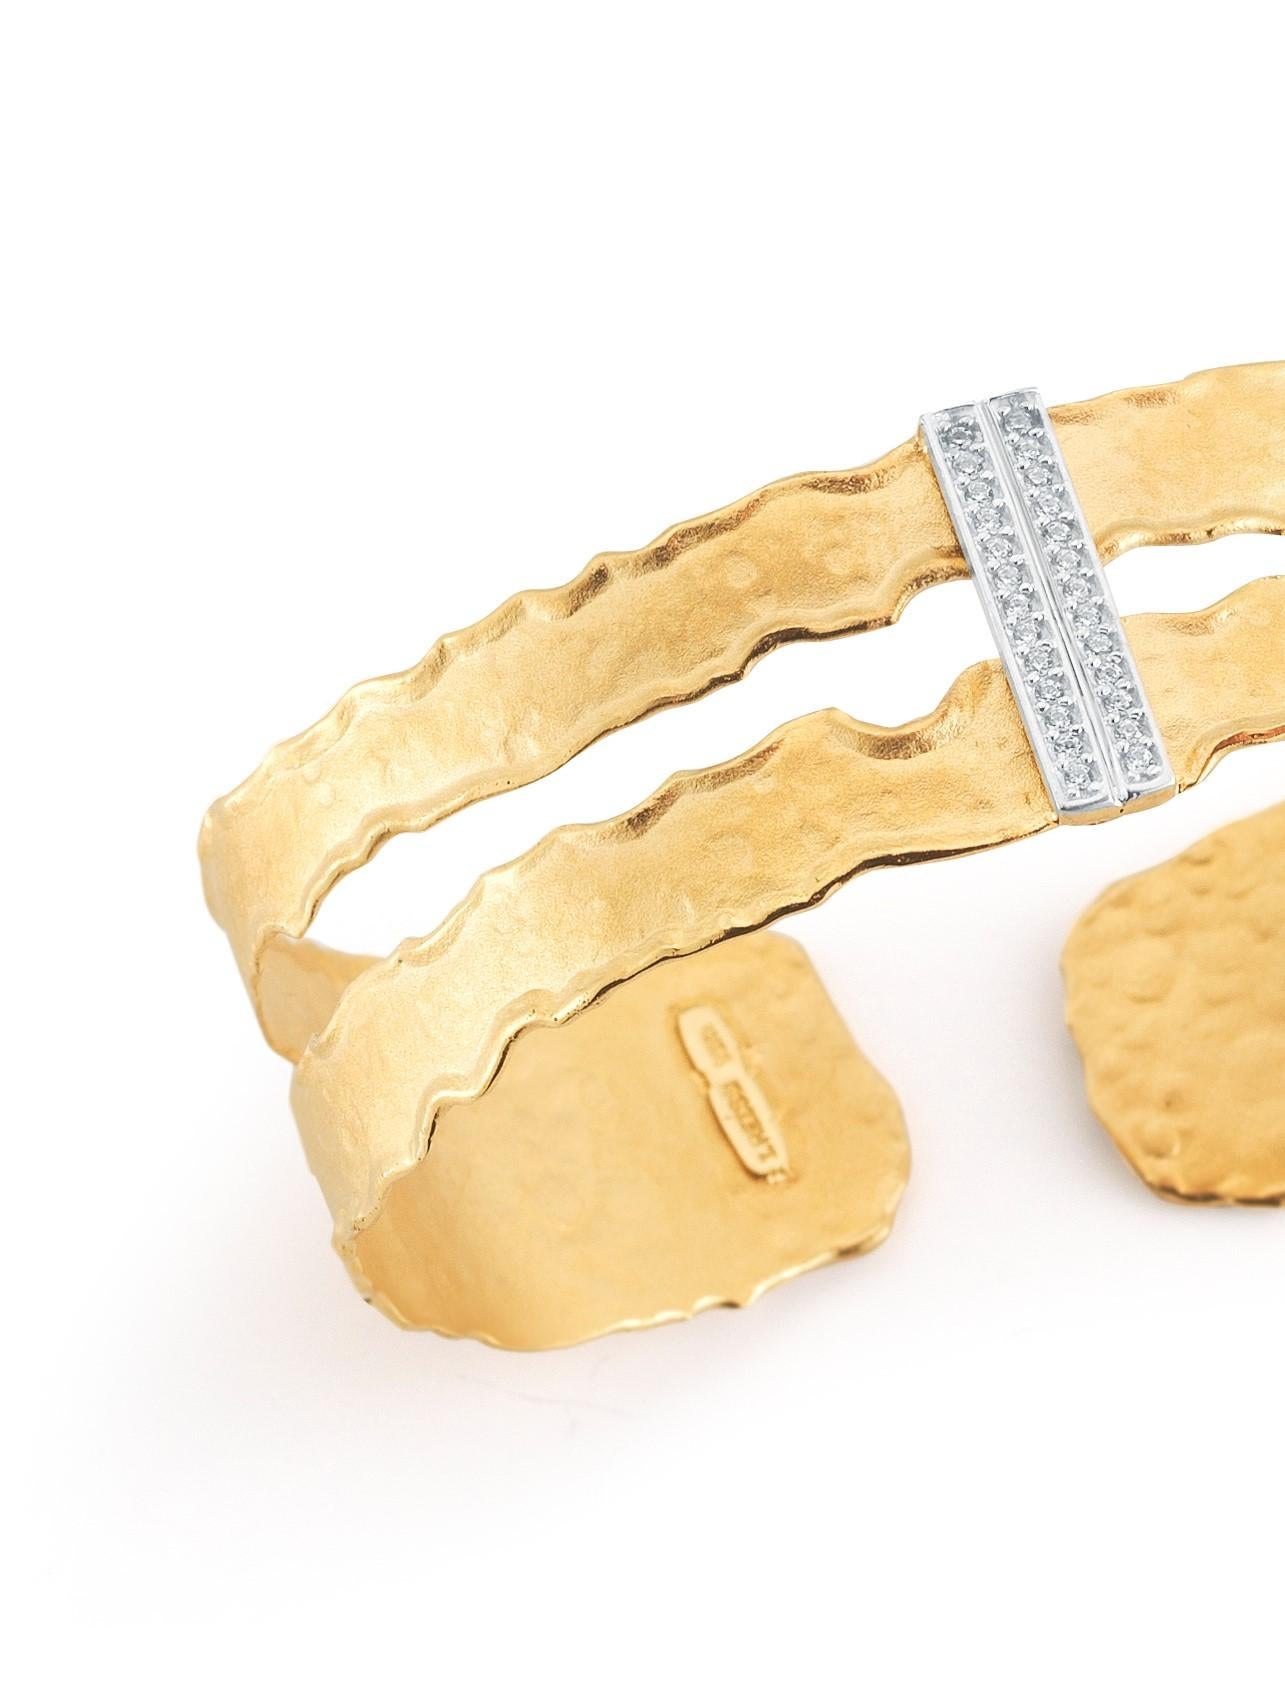 14 Karat Yellow Gold Hand-Crafted Matte and Hammer-Finished Scallop-Edged Cutout Open Cuff Bracelet, Accented with 0.15 Carats of Pave Set Diamonds.
